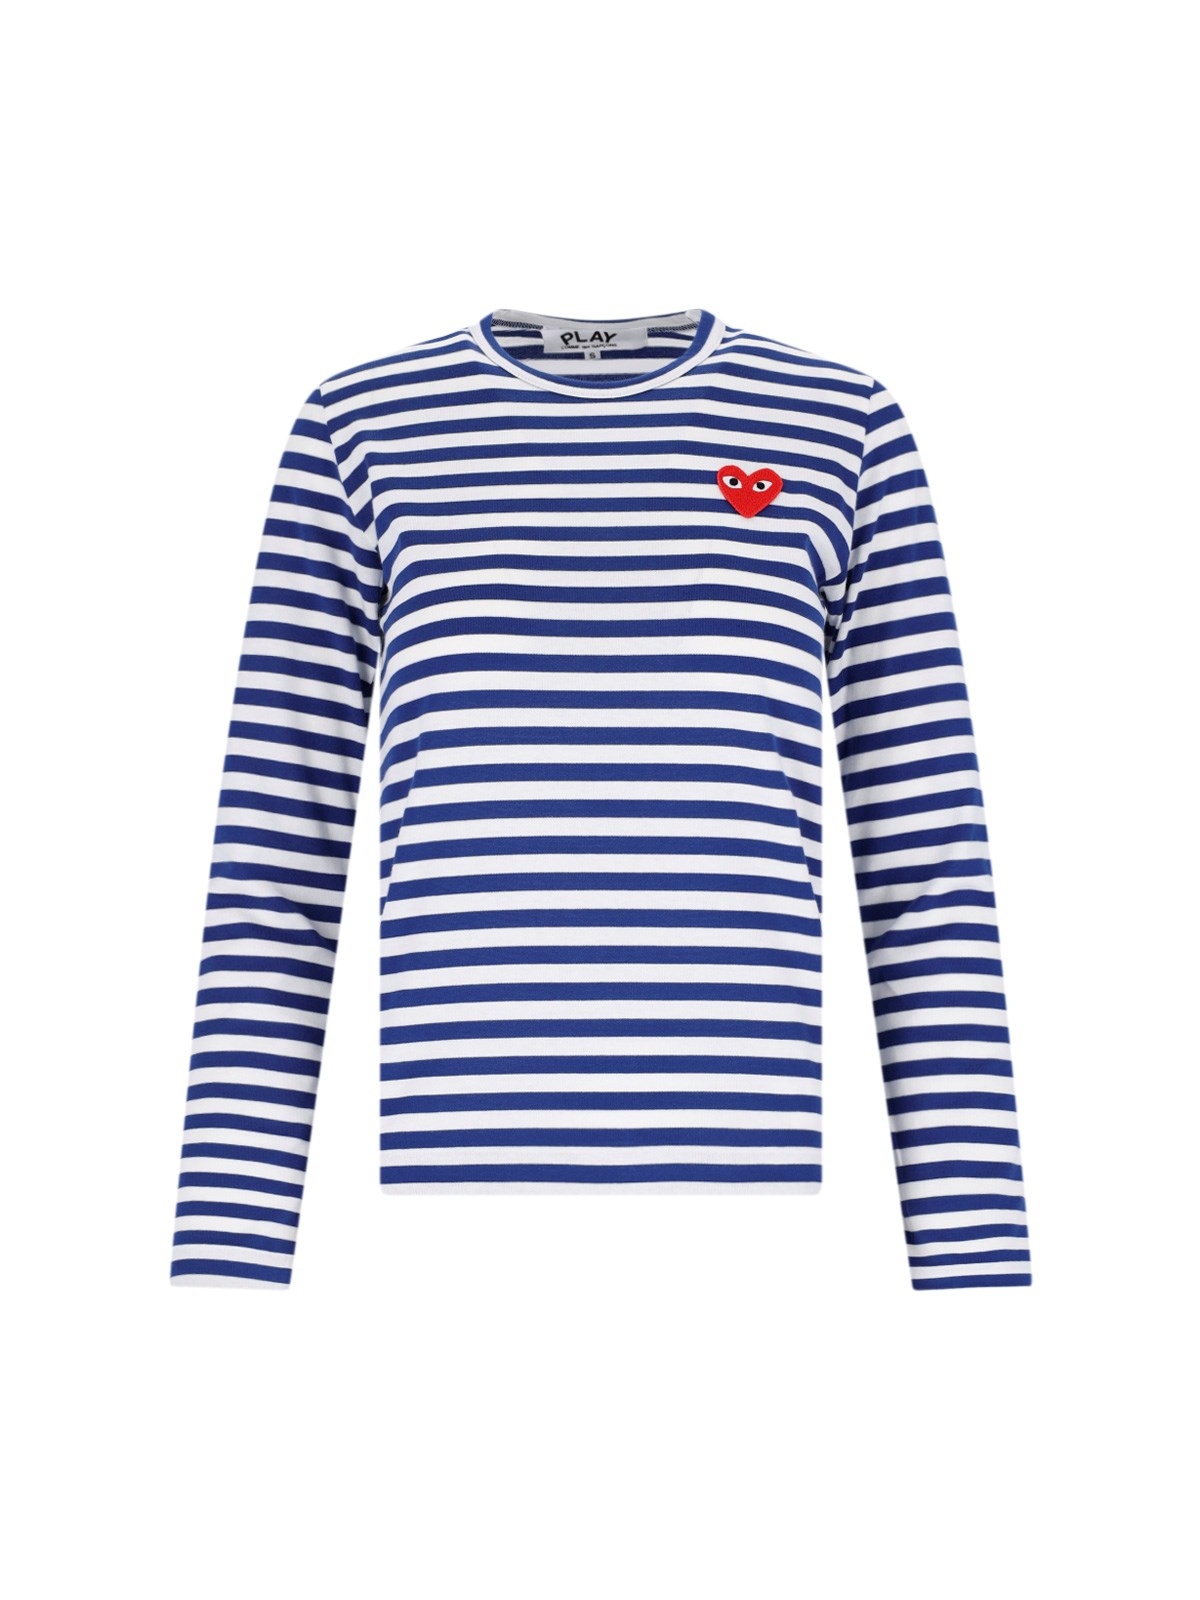 NWT COMME DES GARCONS PLAY Red Heart Striped Long Sleeve T-Shirt Size M  $150